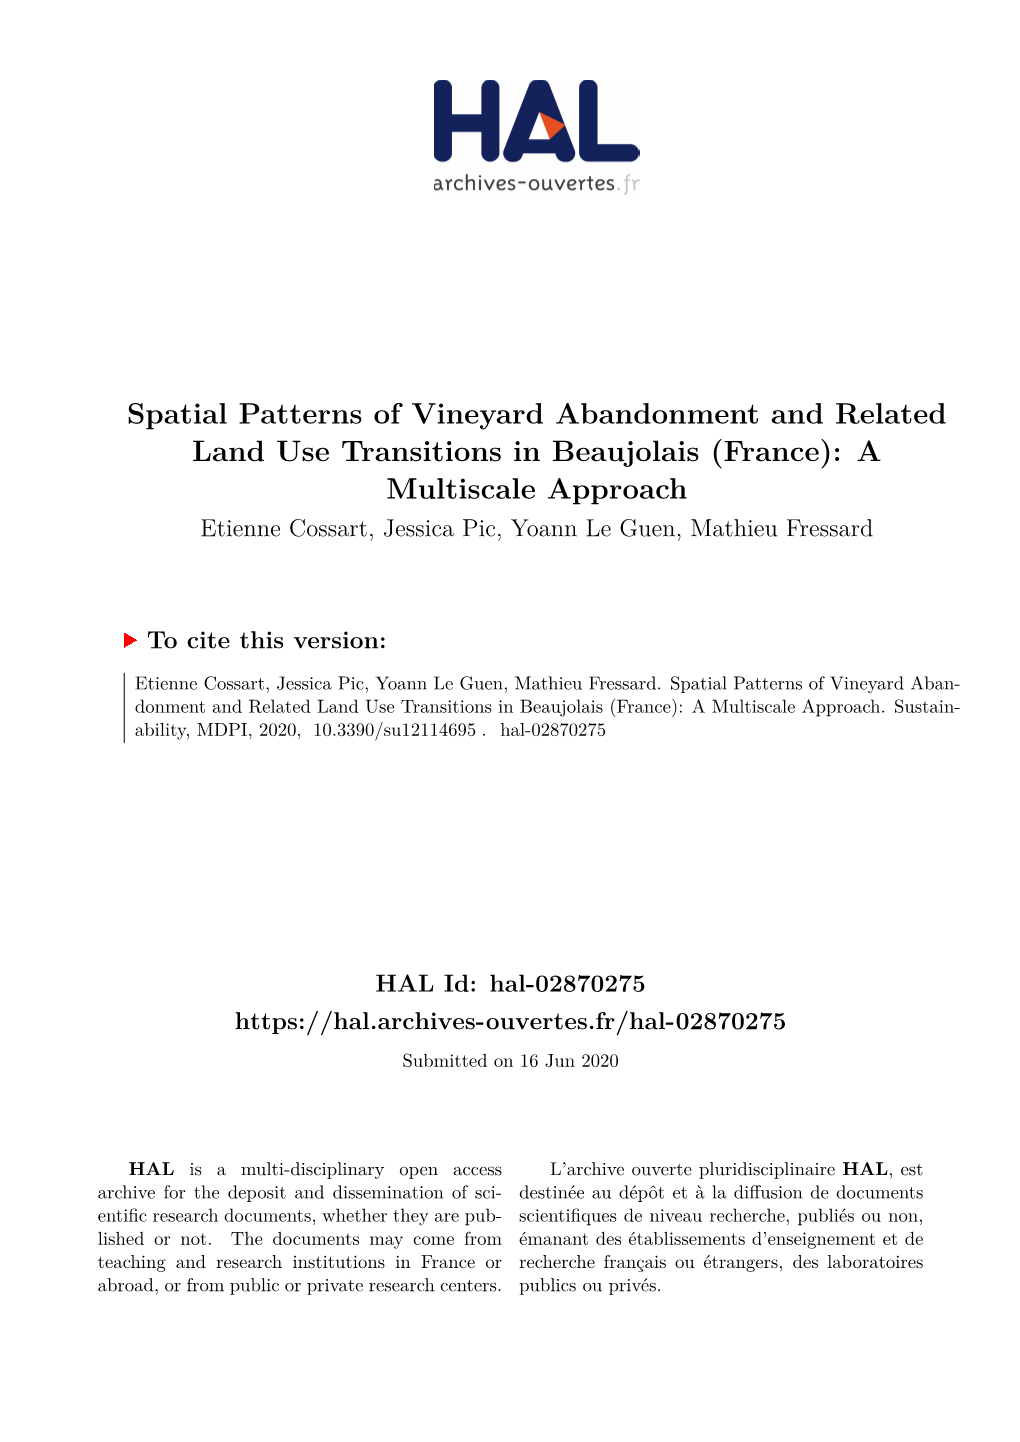 Spatial Patterns of Vineyard Abandonment and Related Land